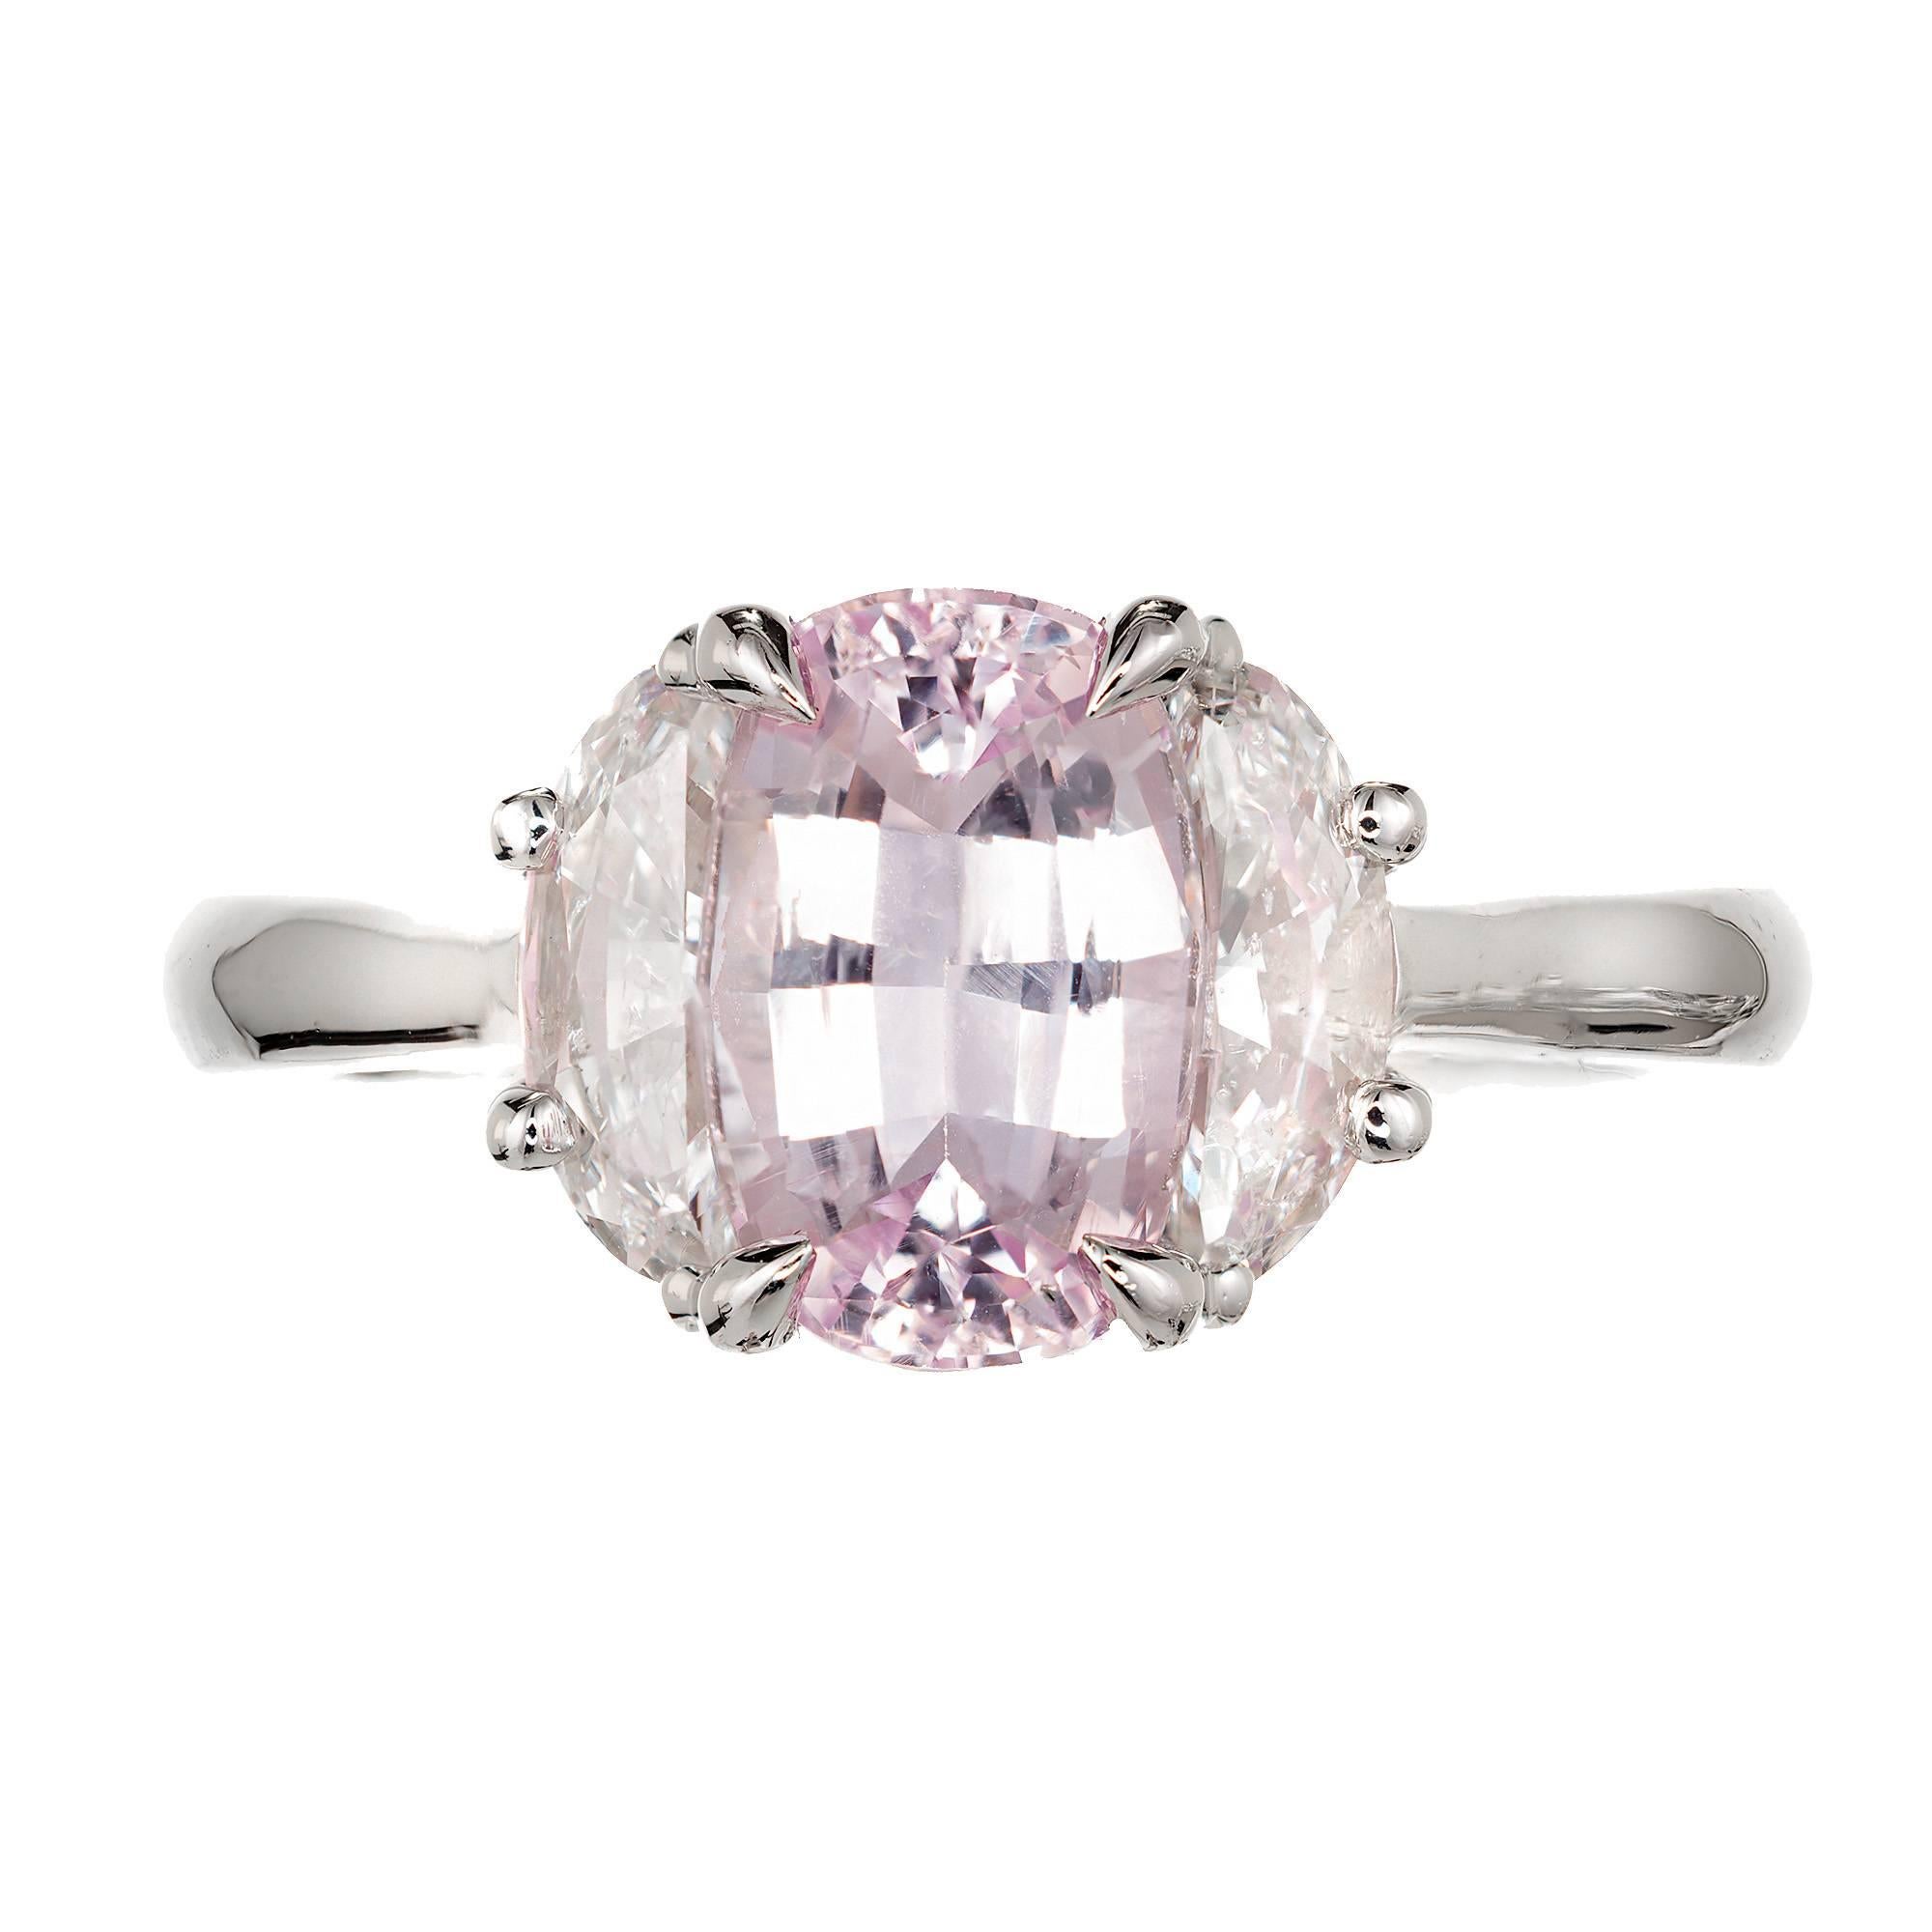 GIA Certified Natural no heat light pink cushion cut fancy color Sapphire matched with two half-moon cut diamonds. Handmade platinum three-stone engagement ring setting. 

One 2.24ct cushion cut natural corundum rare light pink Sapphire, no heat and